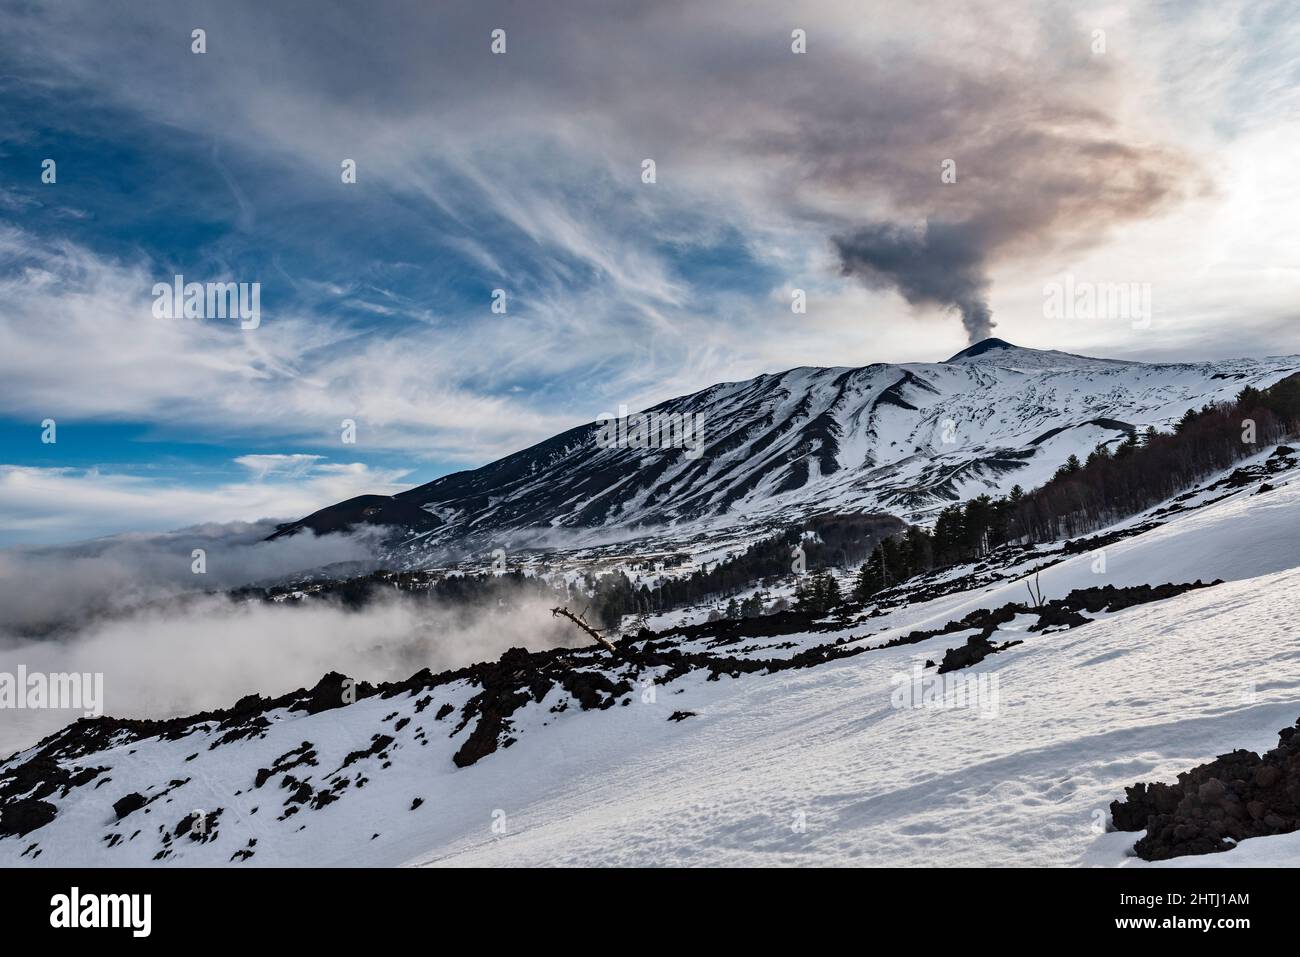 The summit of Mount Etna (3357m), Sicily, Italy, seen in late winter with smoke pouring from the currently active south-east crater Stock Photo